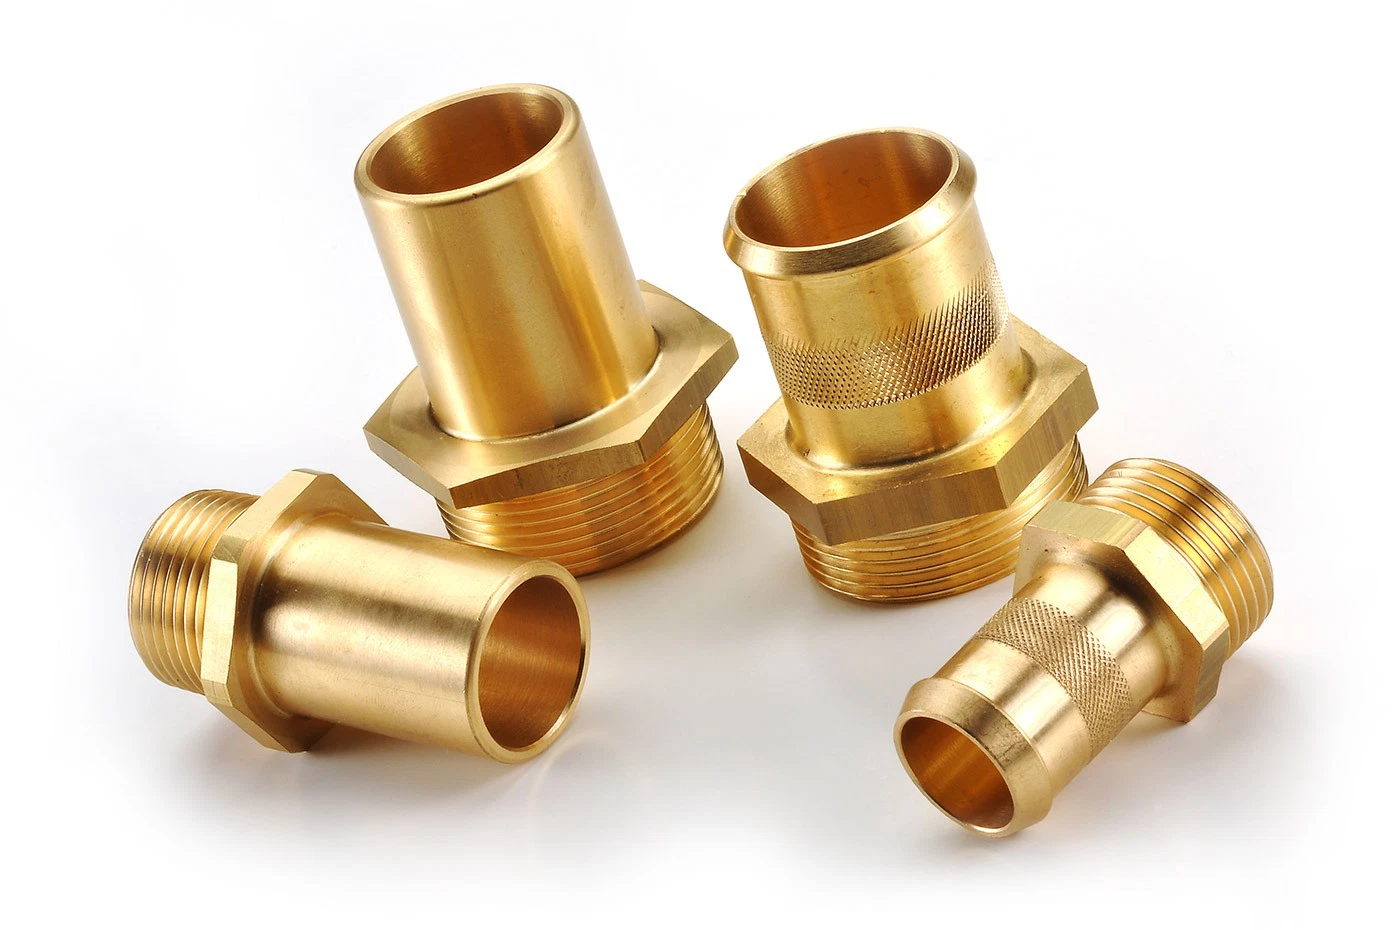 Brass Fittings Precision Customized Copper Machining/Milling CNC Machinery Parts